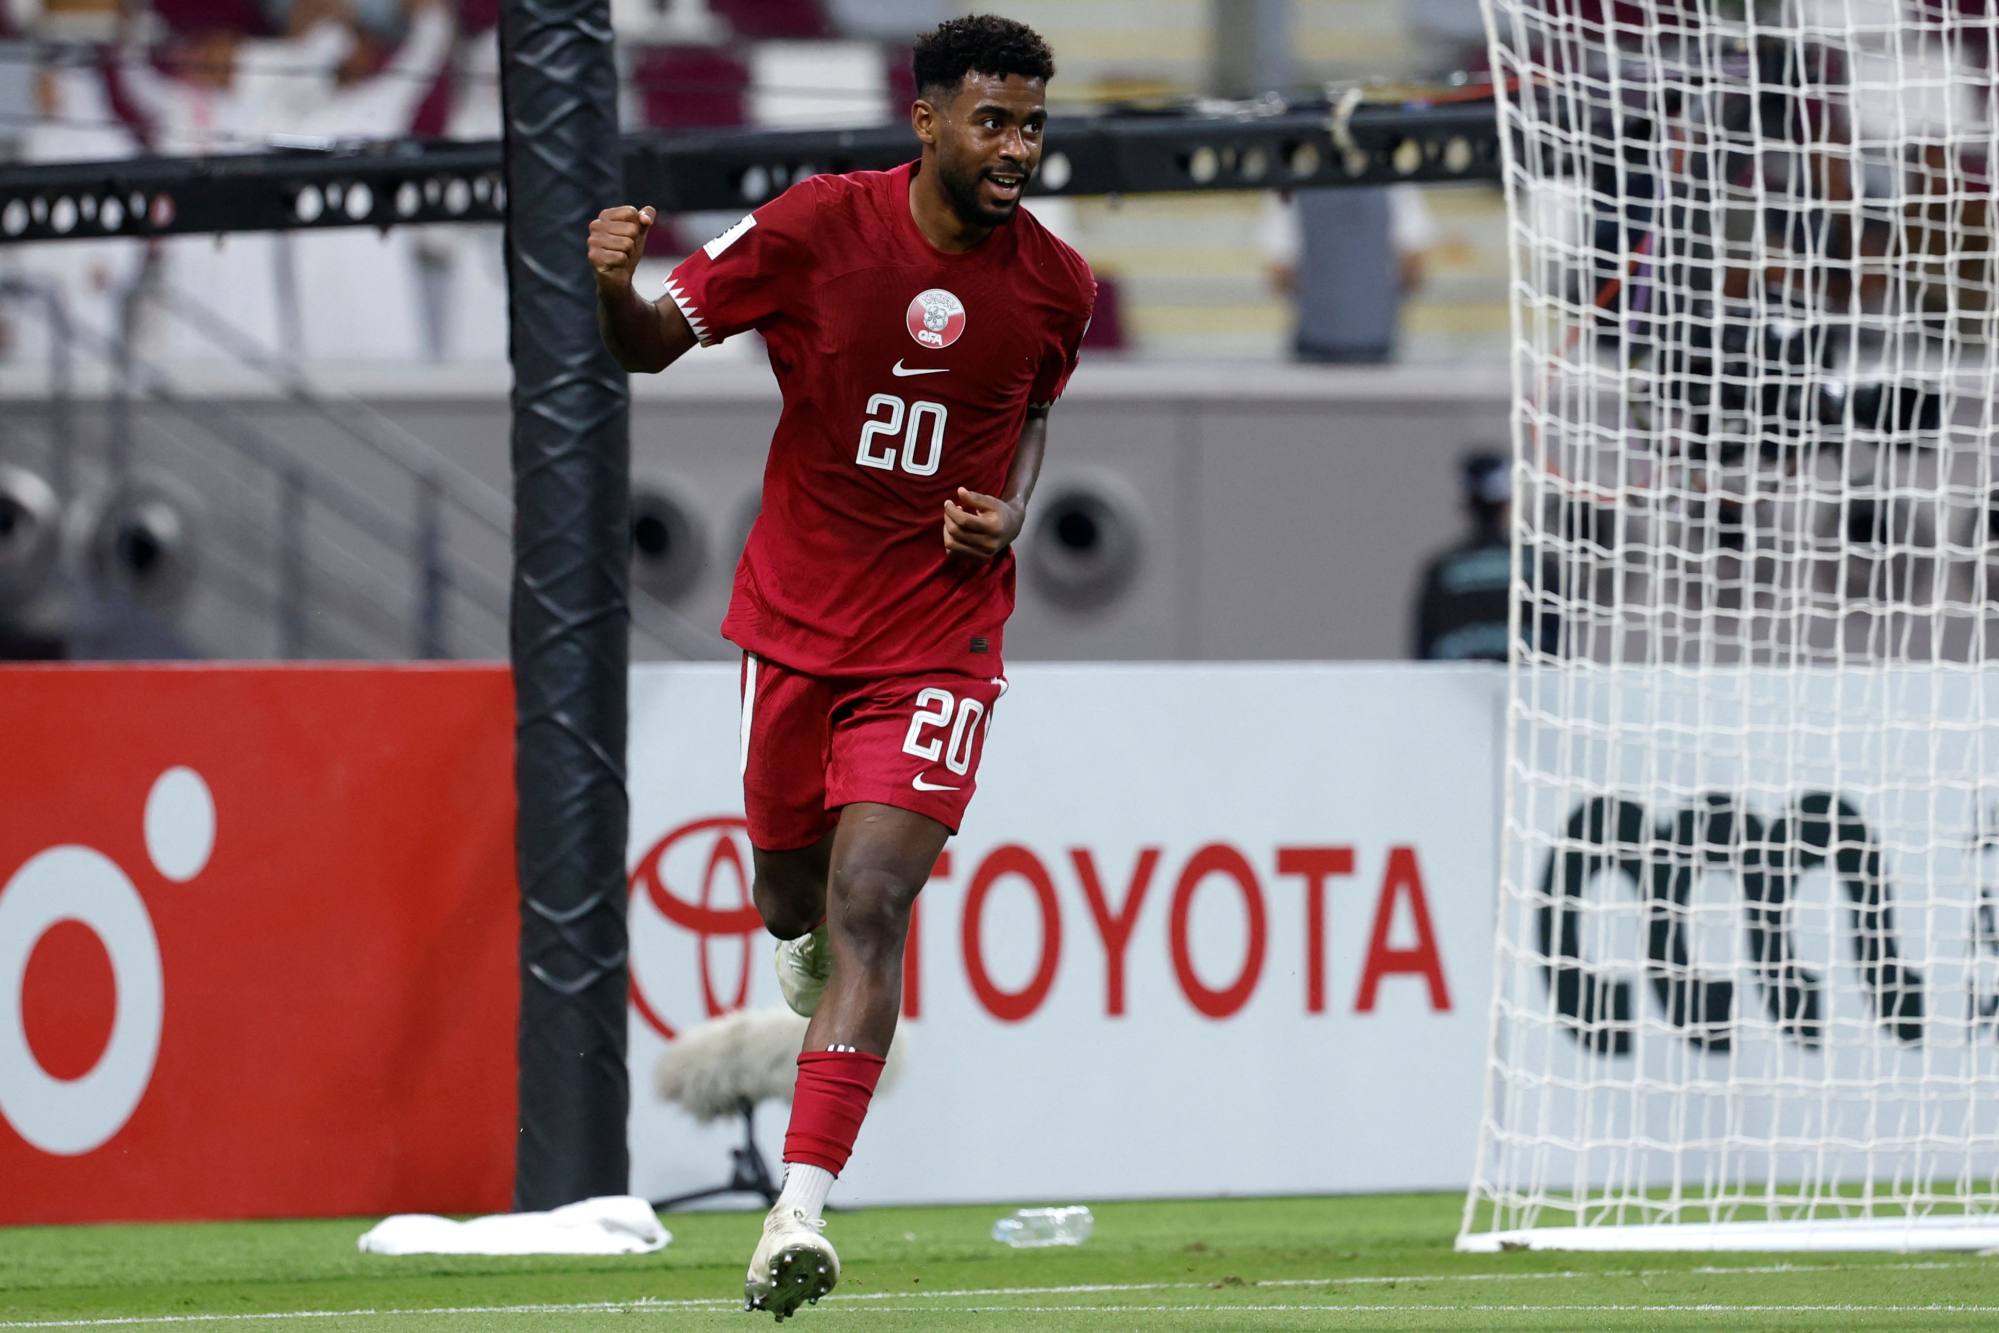 qatar will donate ticket revenue from afc asian cup football tournament to support palestine